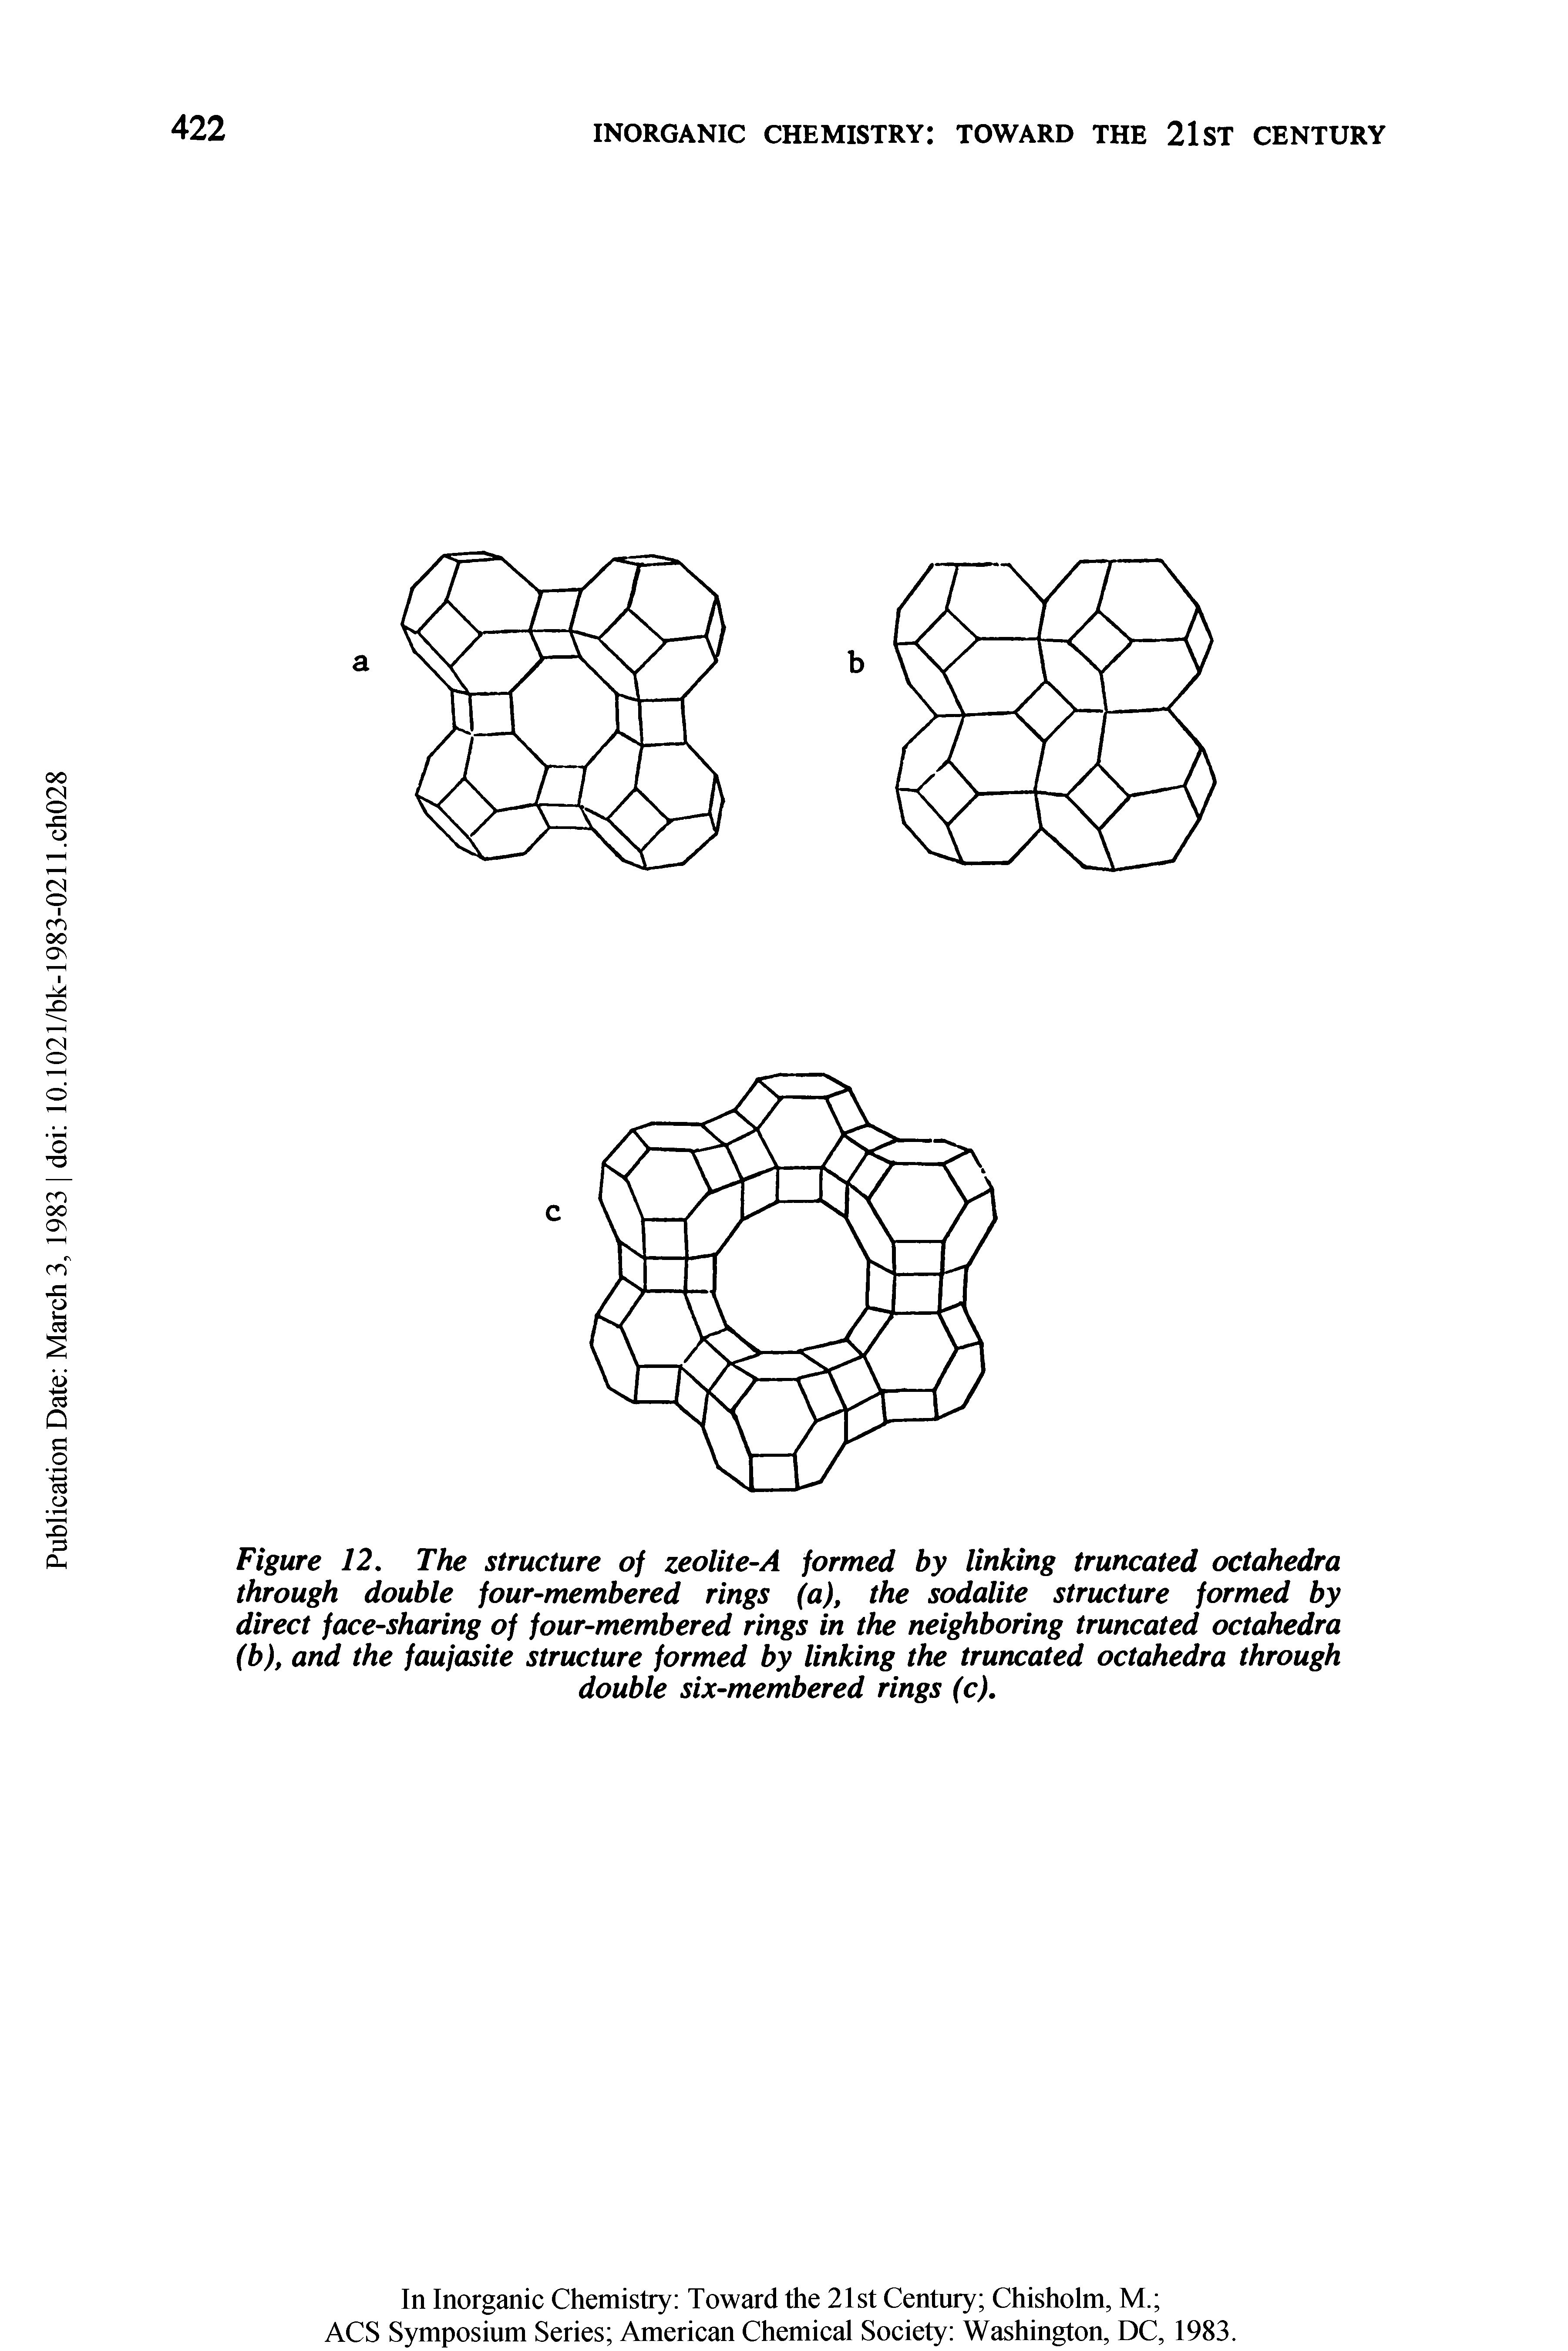 Figure 12. The structure of zeolite-A formed by linking truncated octahedra through double four-membered rings (a), the sodalite structure formed by direct face-sharing of four-membered rings in the neighboring truncated octahedra (b), and the faujasite structure formed by linking the truncated octahedra through double six-membered rings (c).